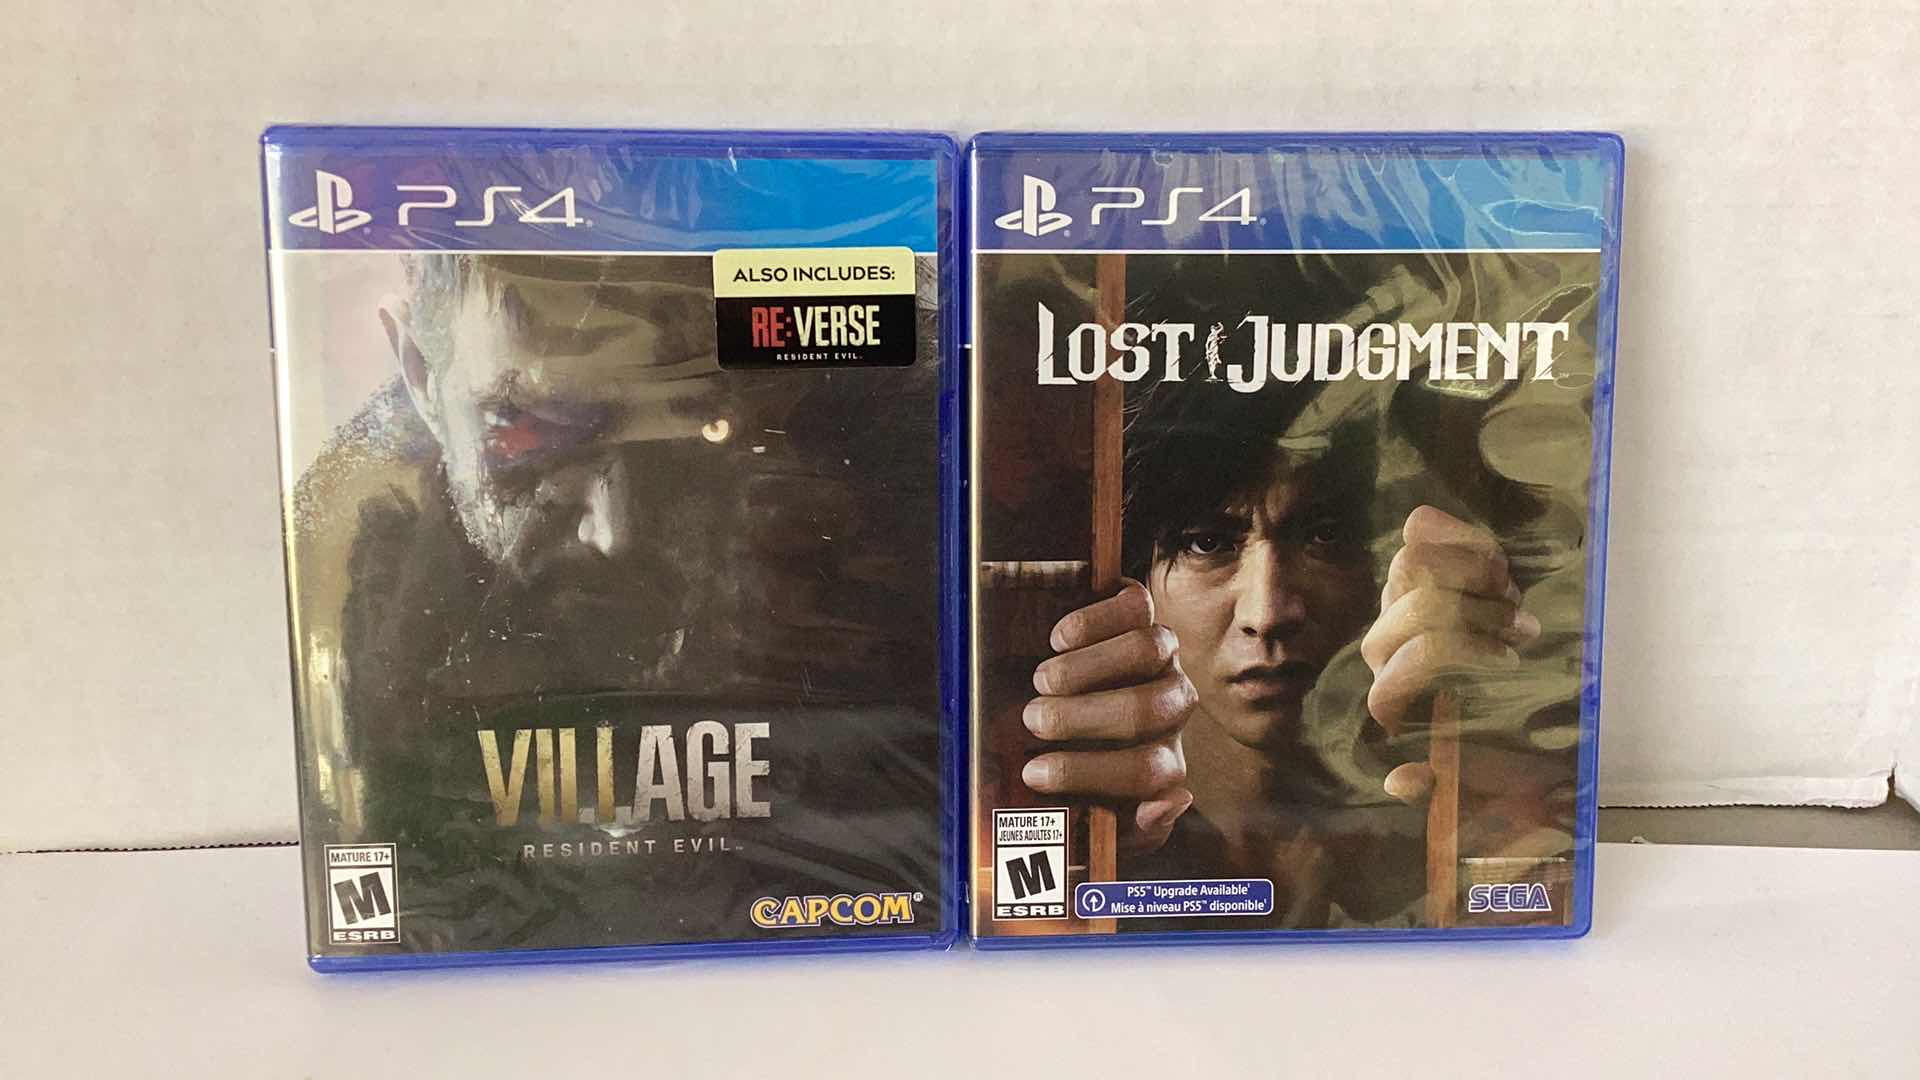 Photo 1 of 2 NEW PS4 GAMES: RESIDENT EVIL VILLAGE AND LOST JUDGEMENT